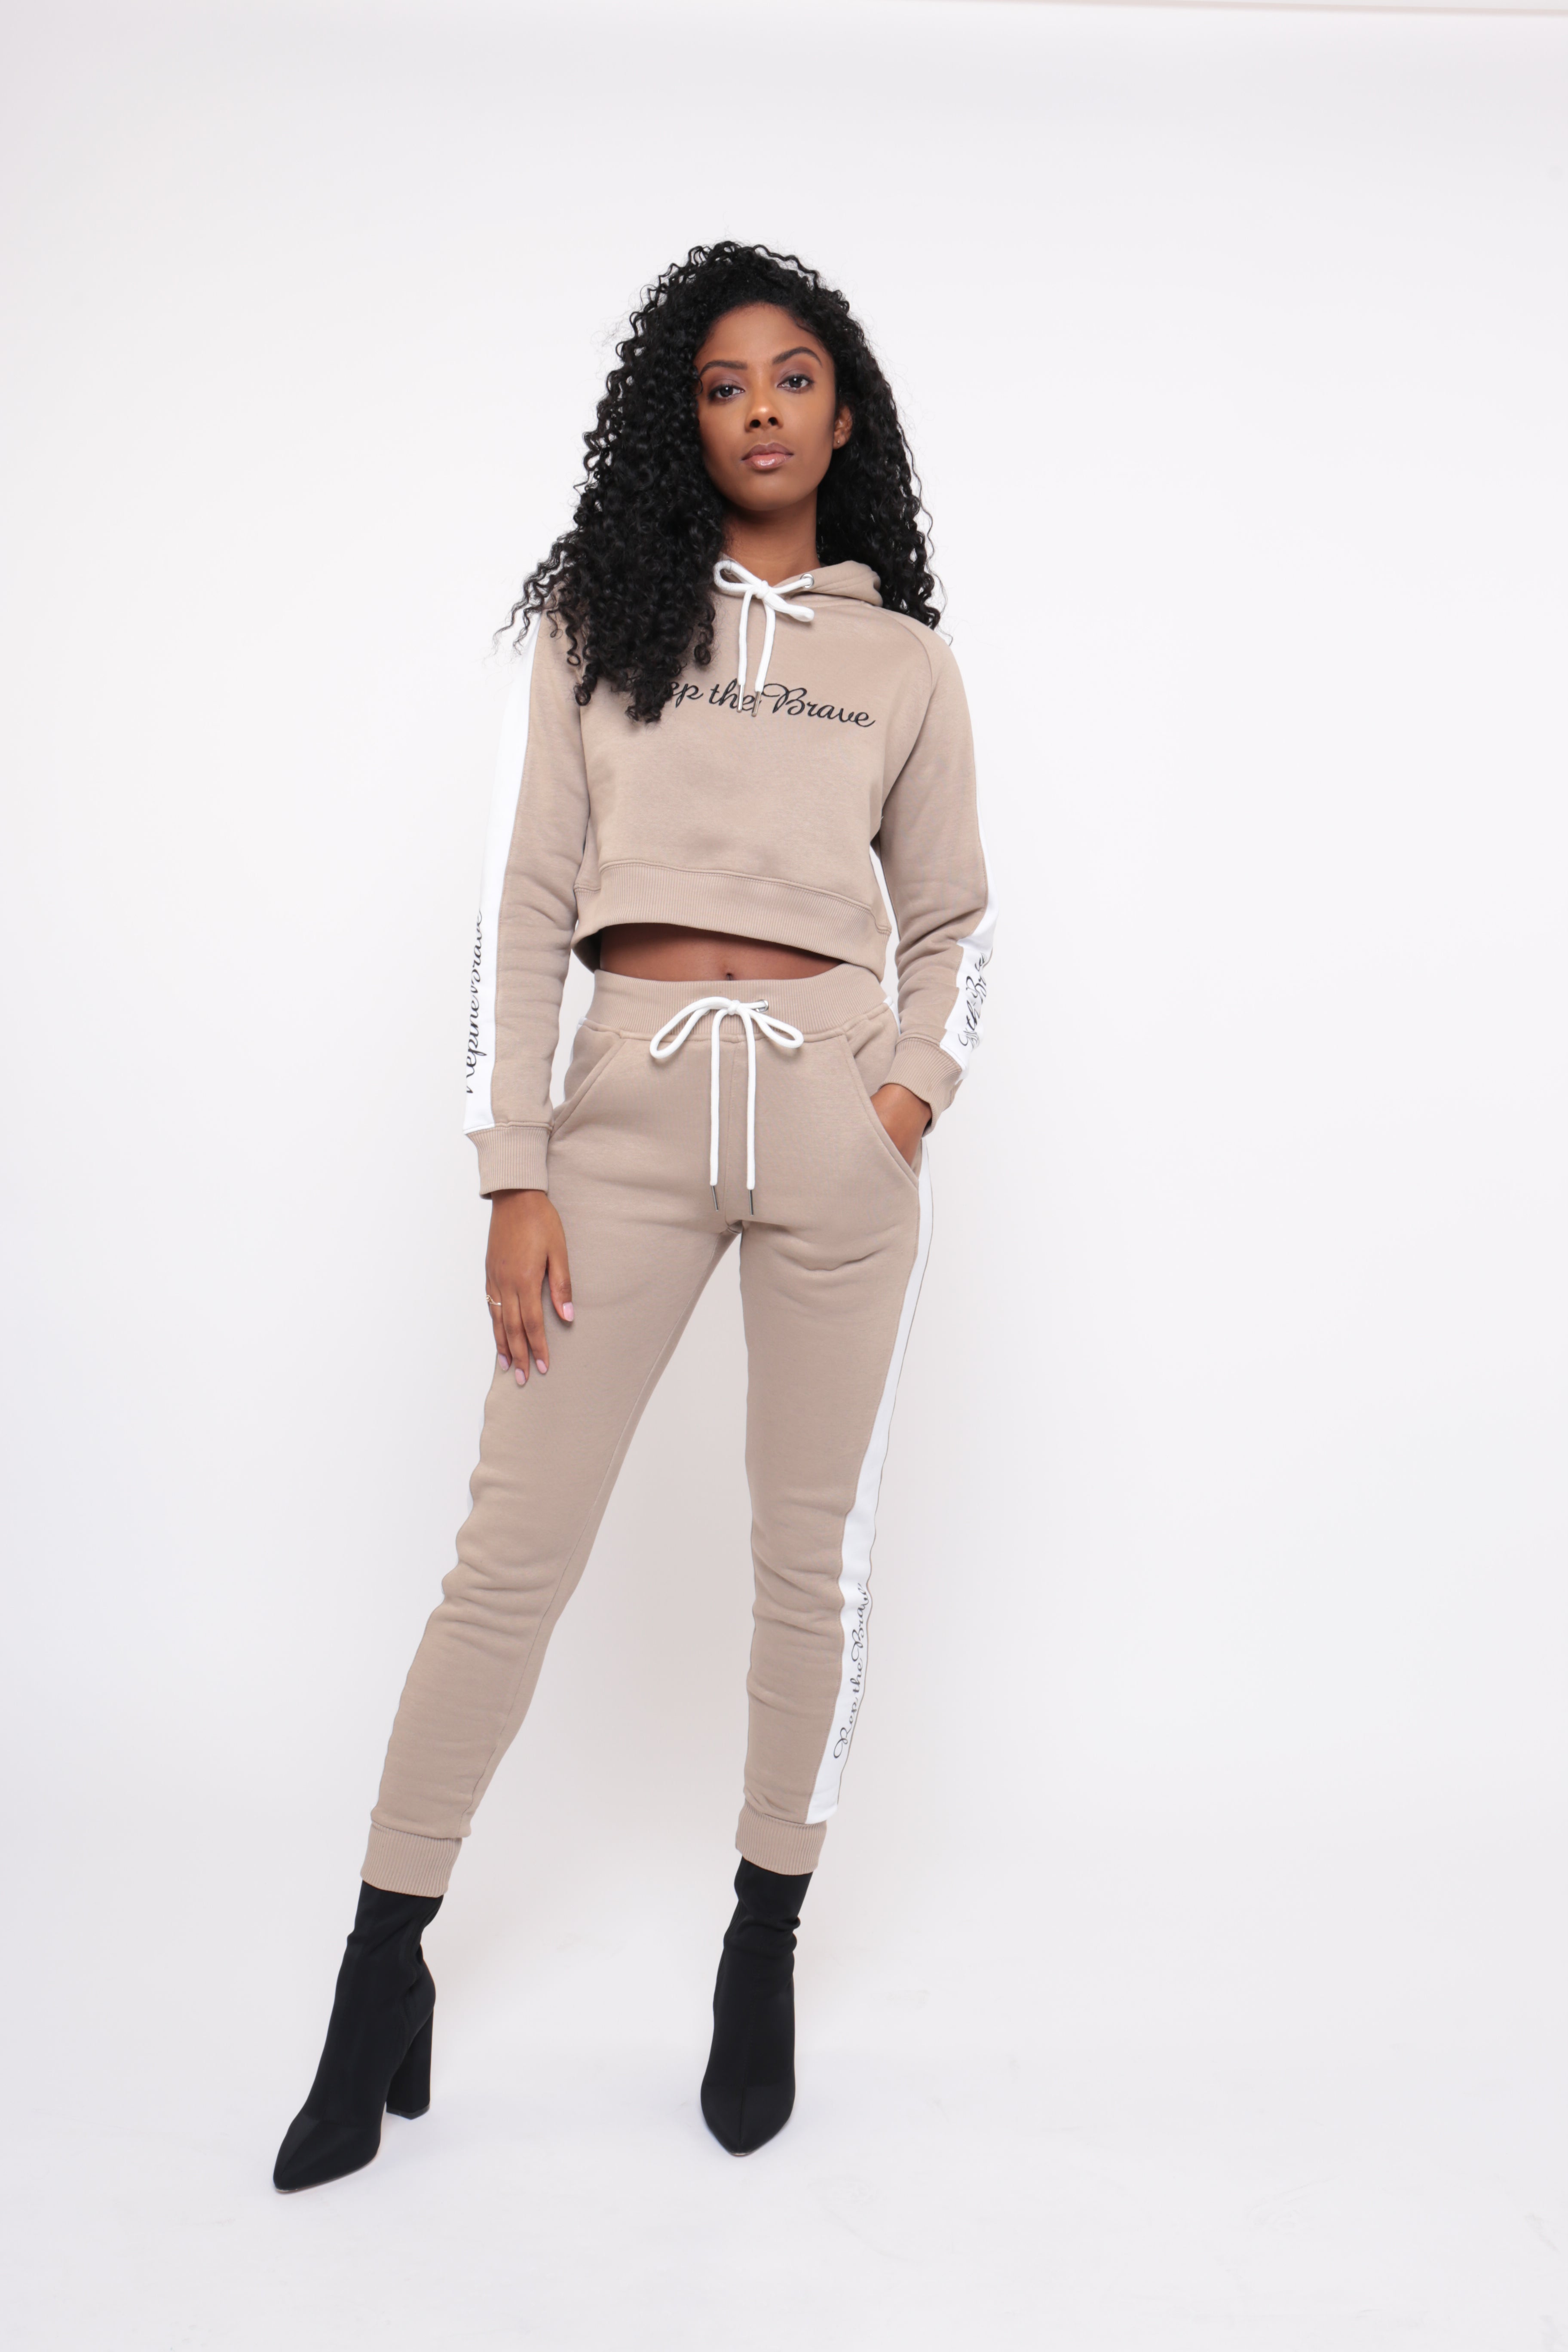 REPTHEBRAVE NUDE TRACKSUIT CO-ORD BOTTOMS